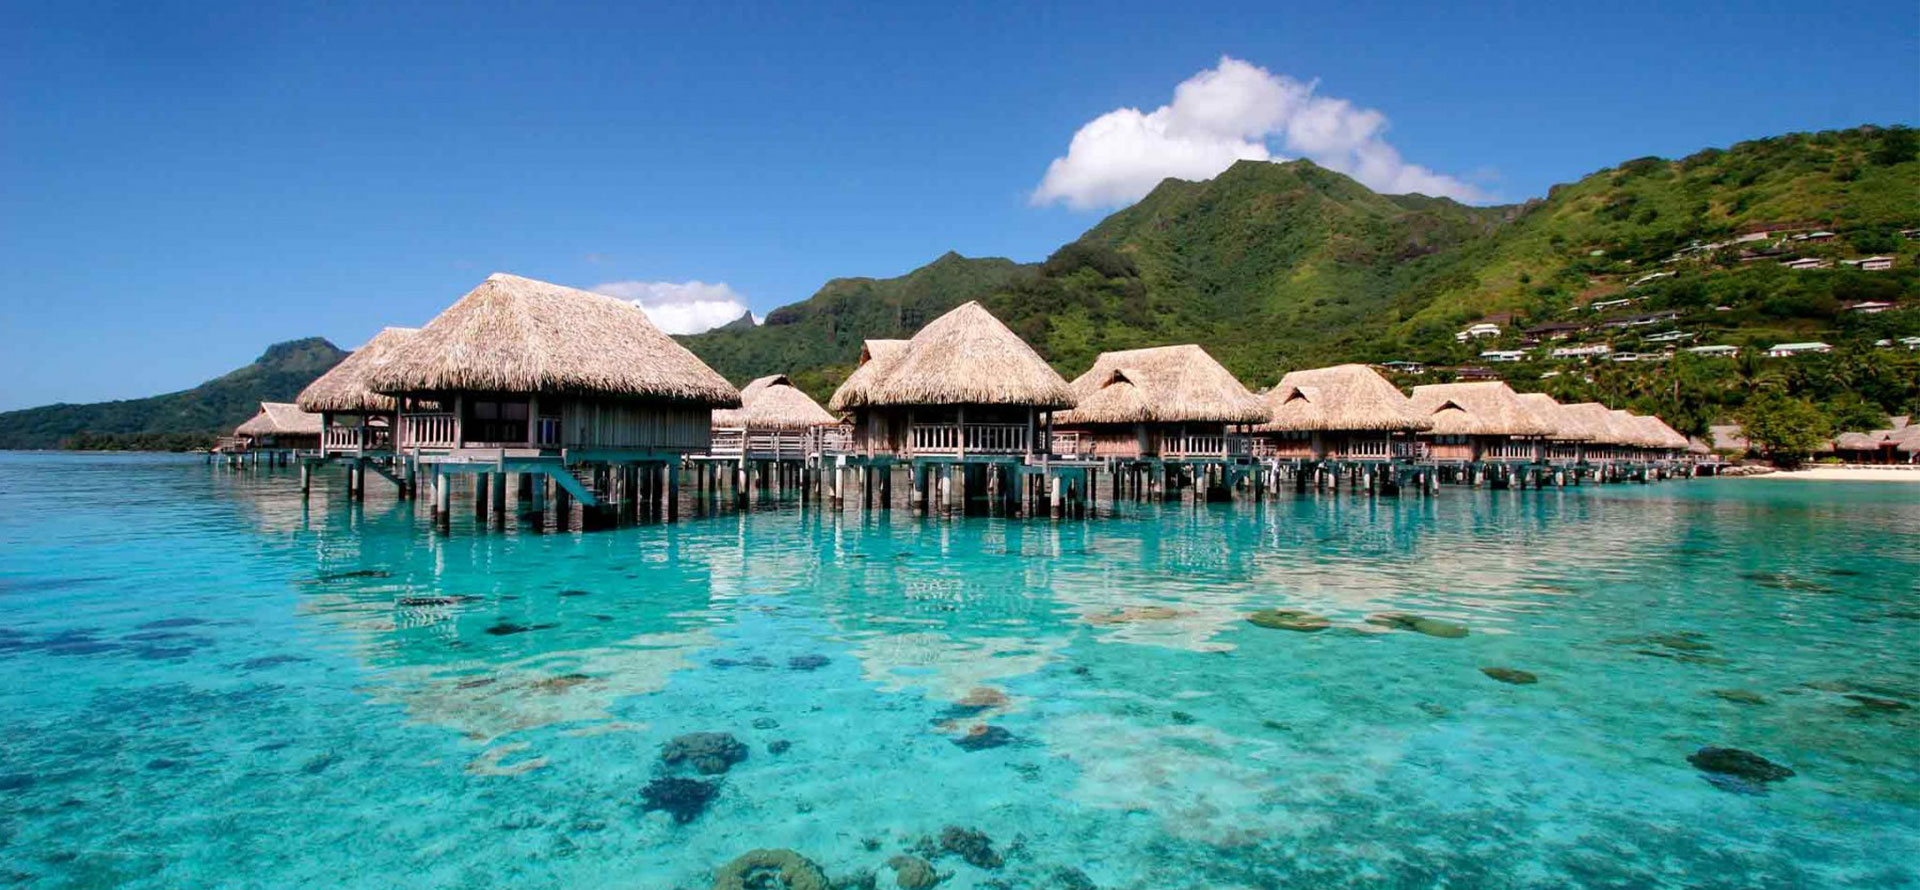 Moorea best view of bungalows on water.